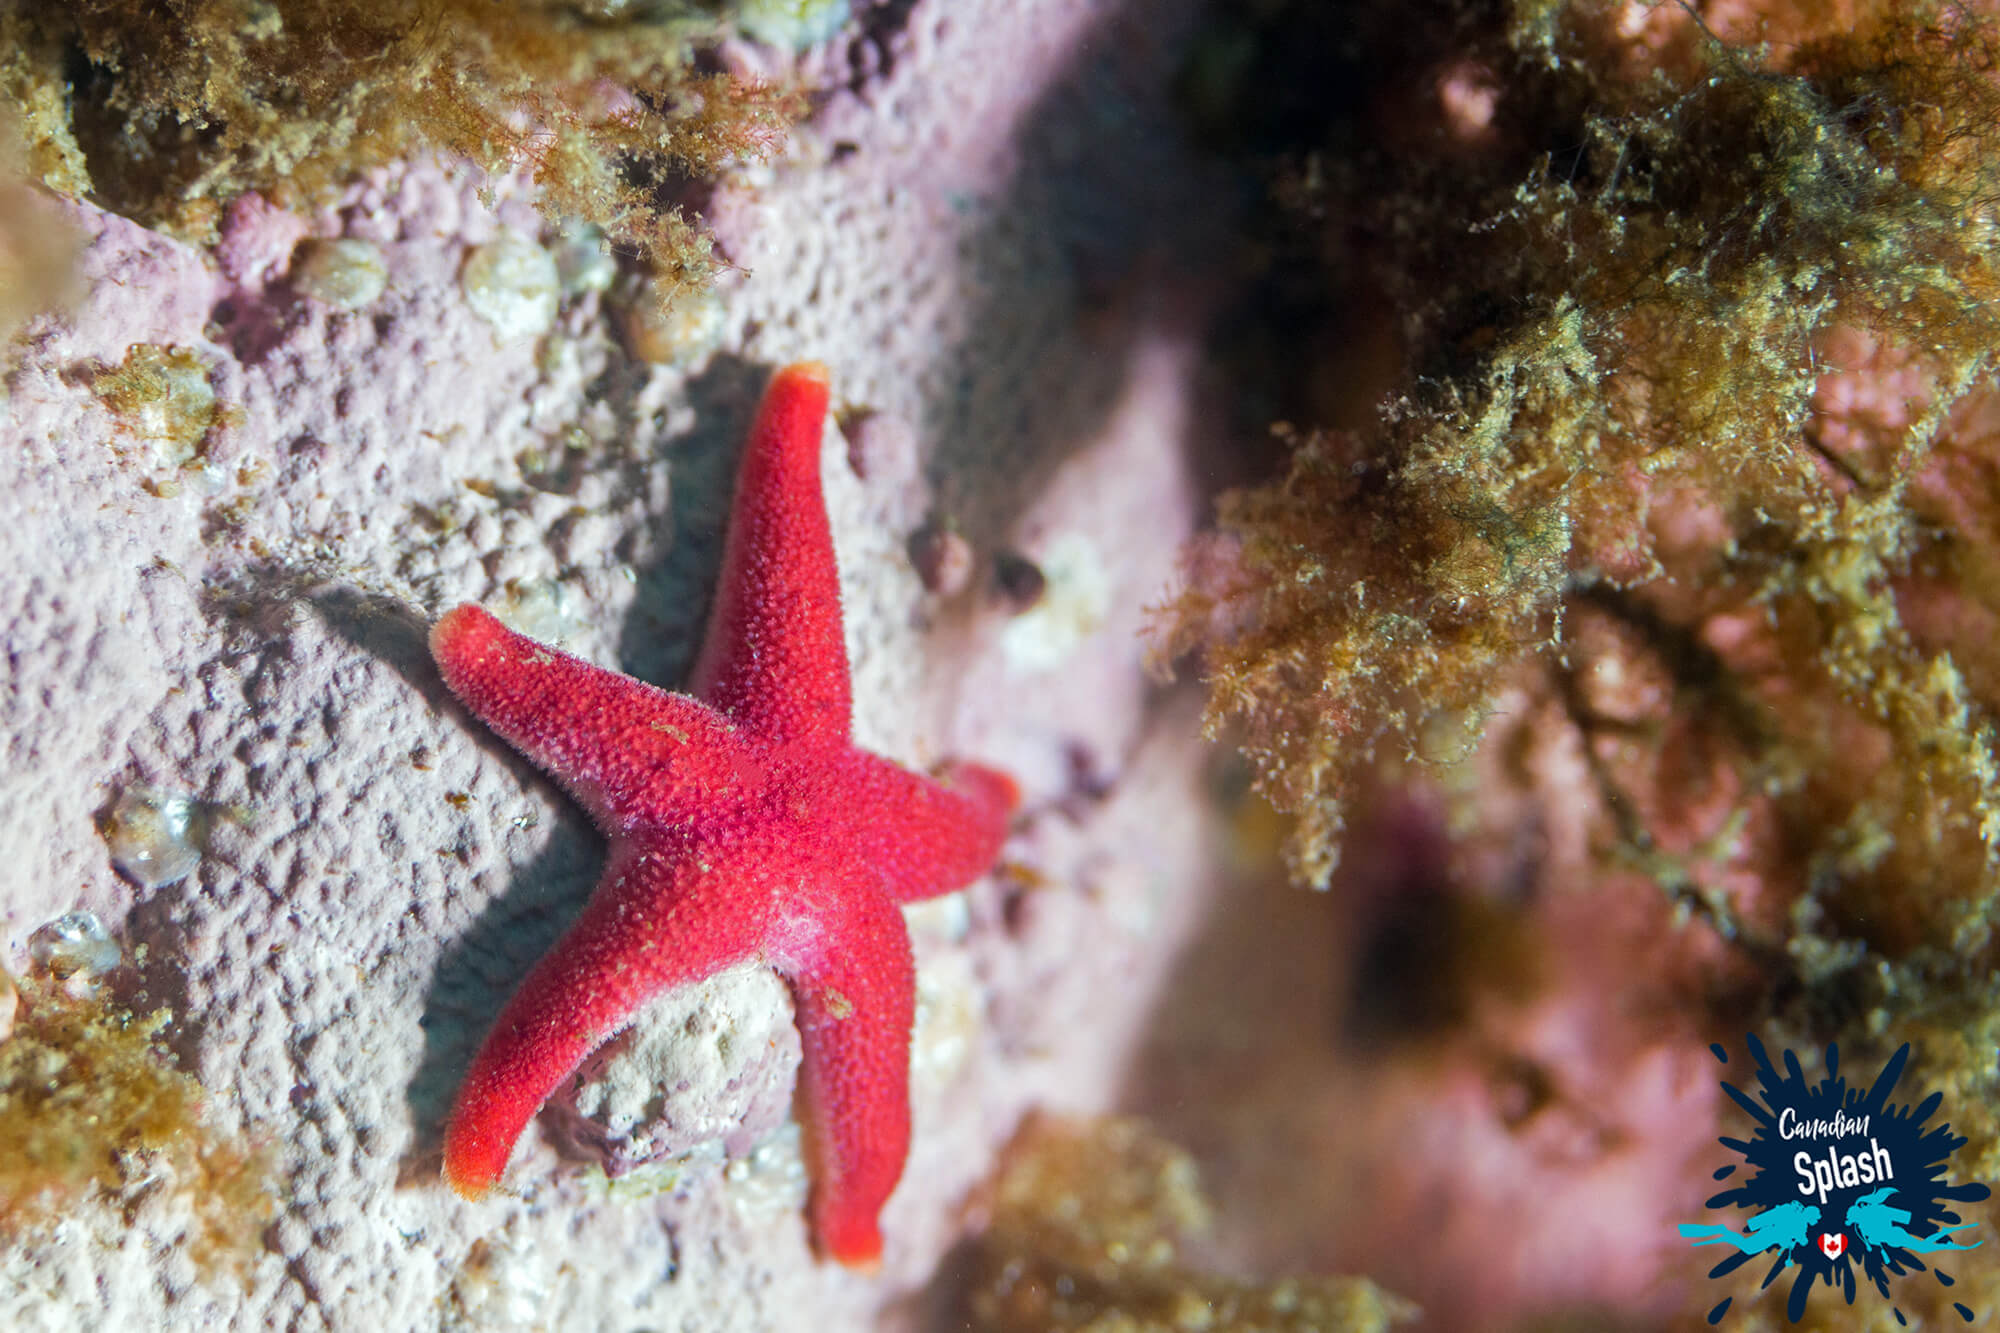 A Small Pink Blood Star On A Rock In Saint Andrews, New Brunswick, Canadian Splash Scuba Diving